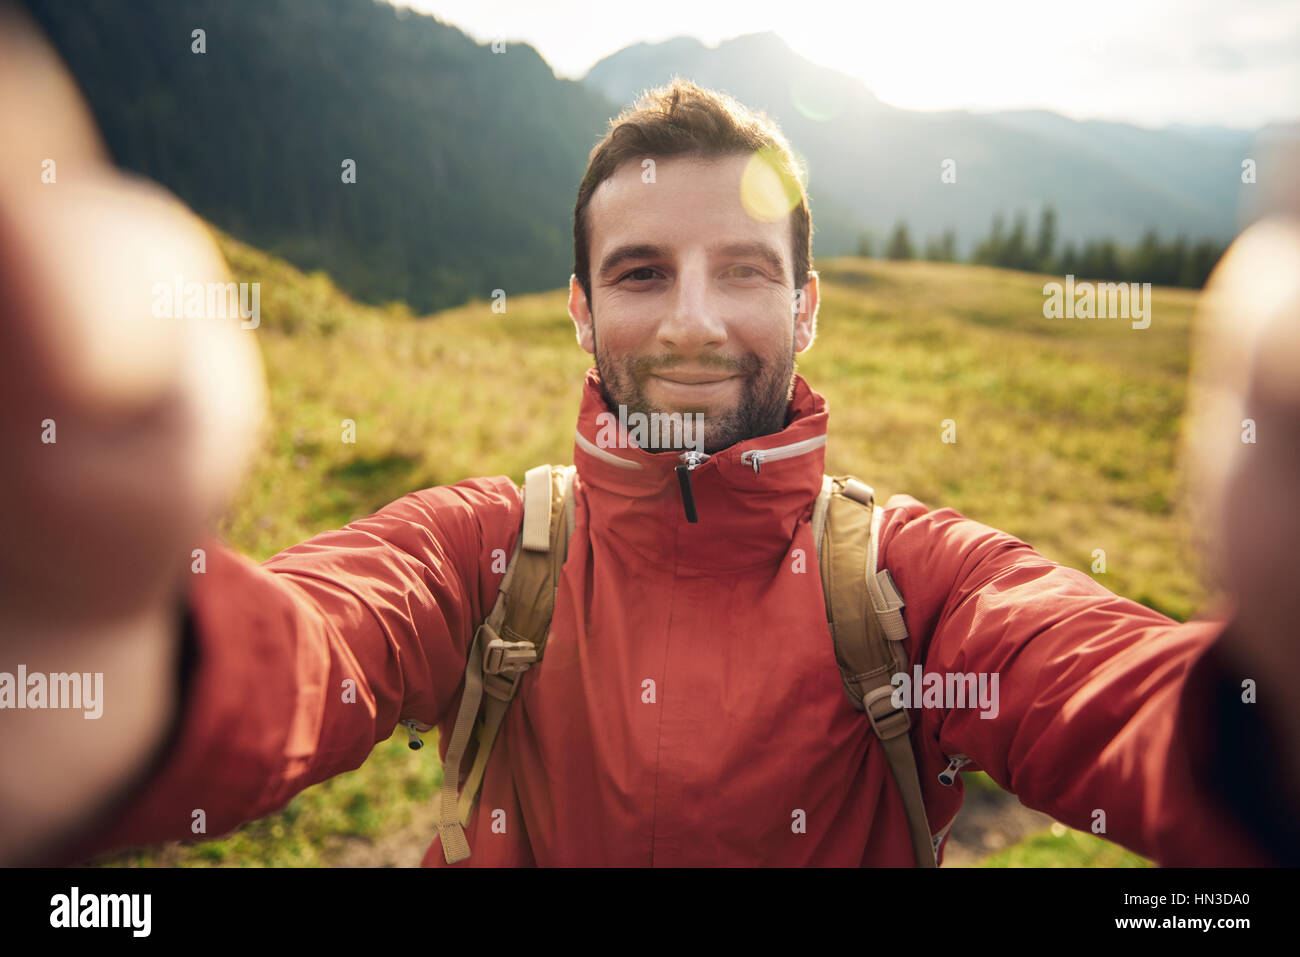 Young man in hiking gear standing outside taking a selfie with mountains behind him while out trekking in the wilderness Stock Photo